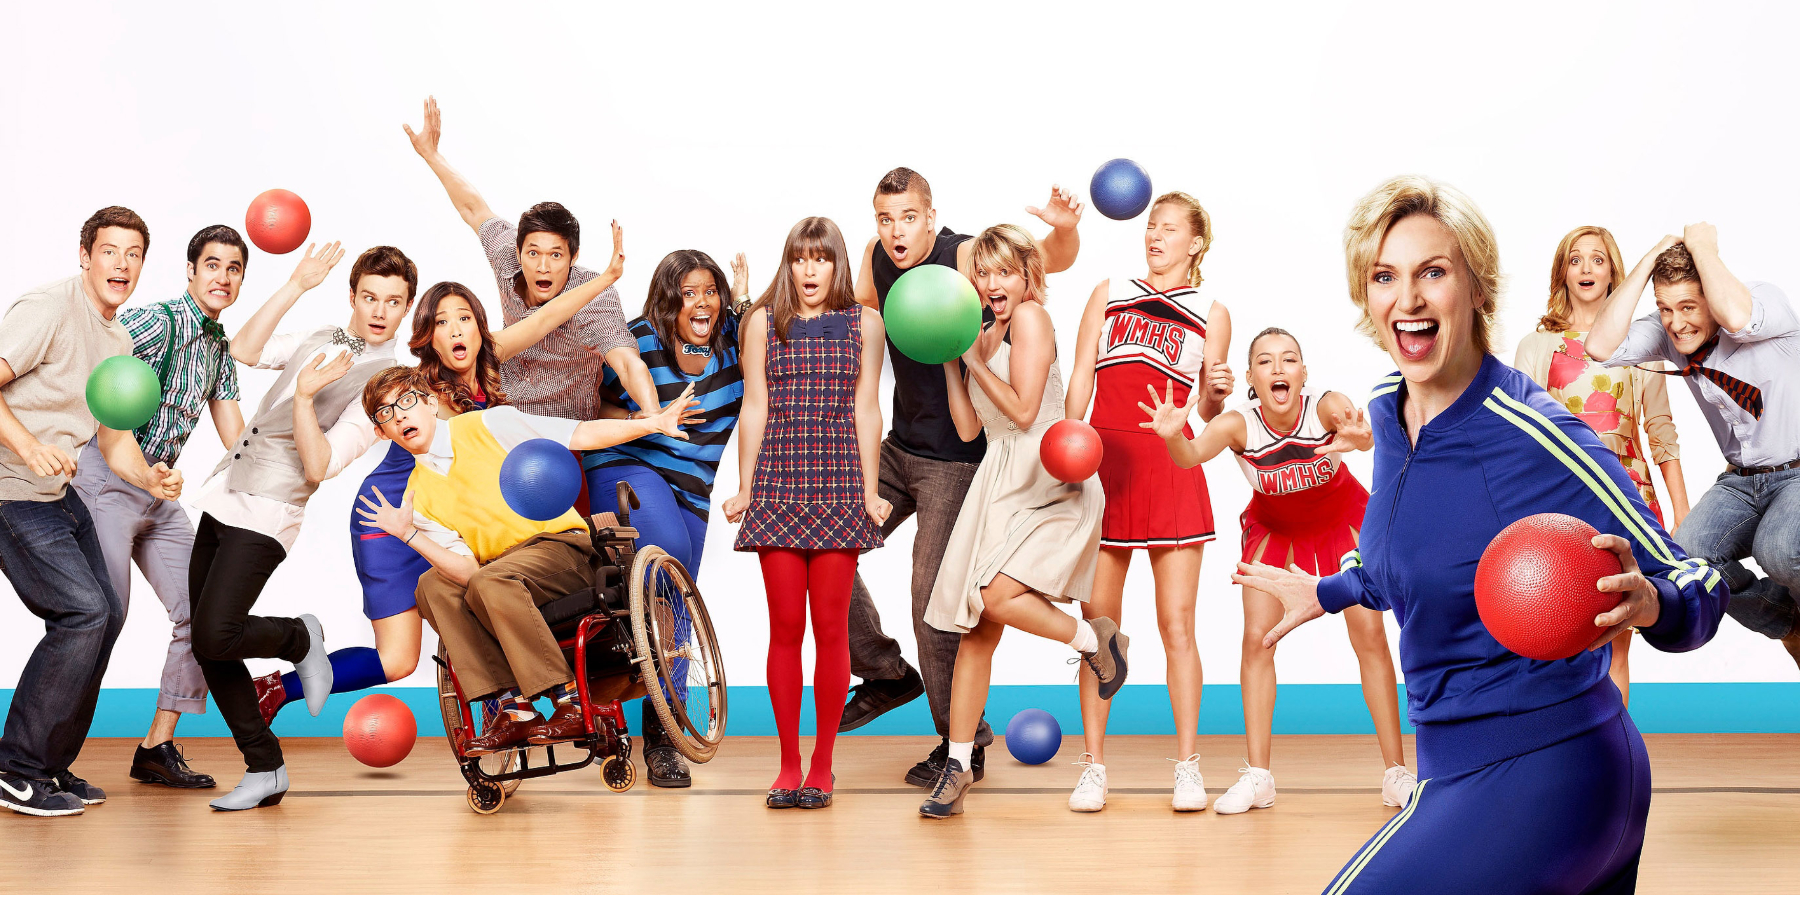 A cast photo depicting Glee's stars in 2010.